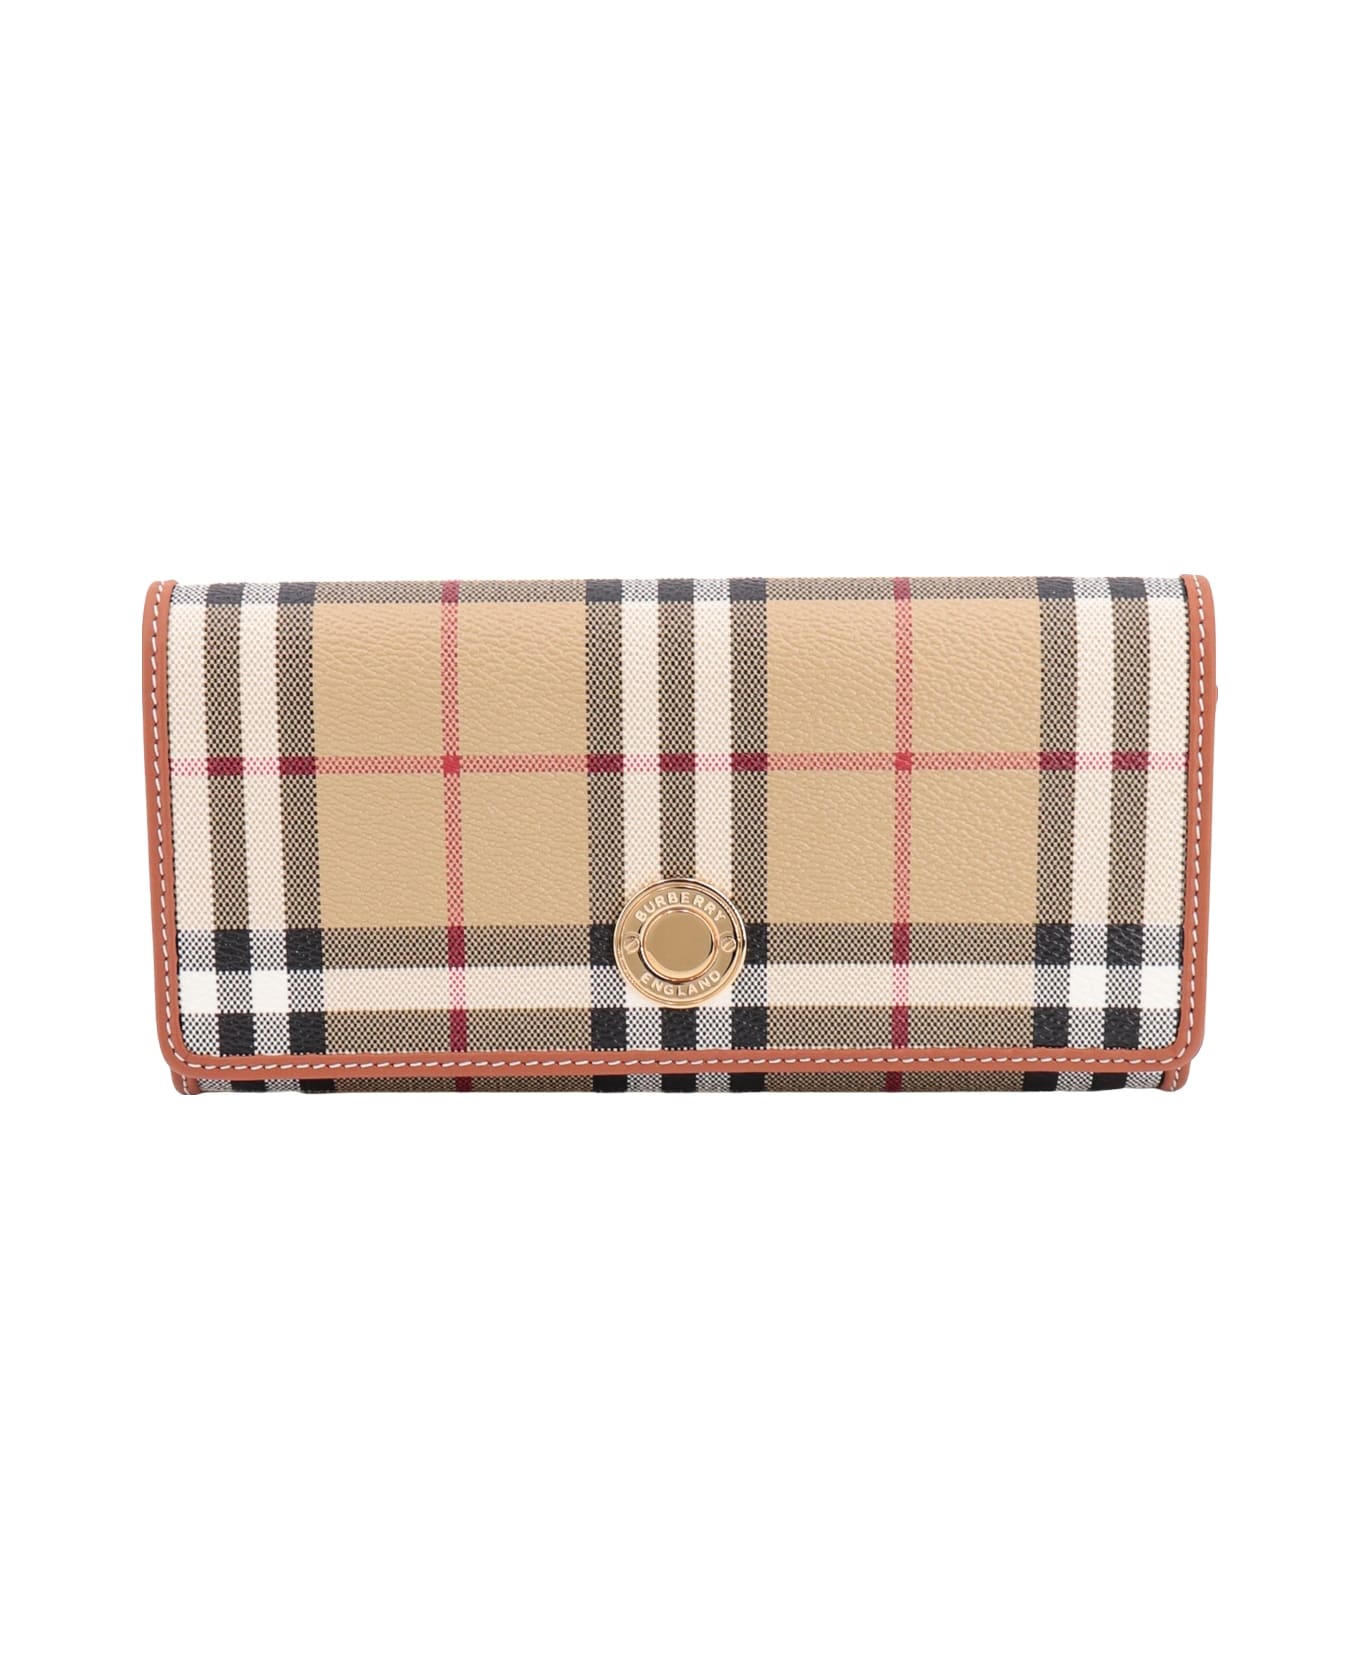 Burberry Wallet - Brown クラッチバッグ